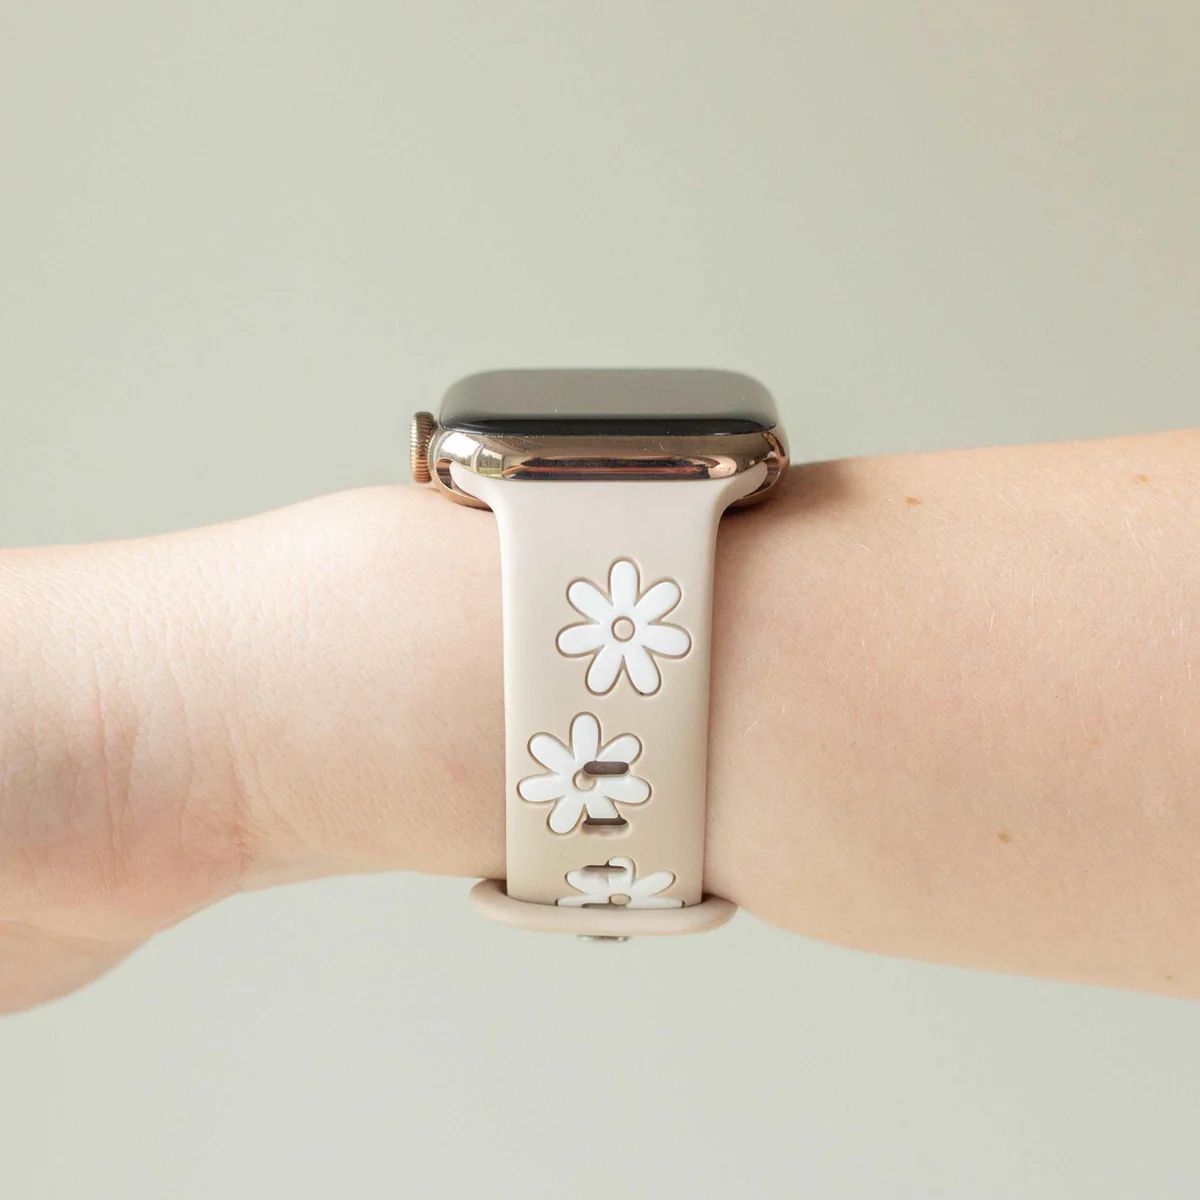 Darling Daisy Nude & White Apple Watch Band | StrawberryAvocados